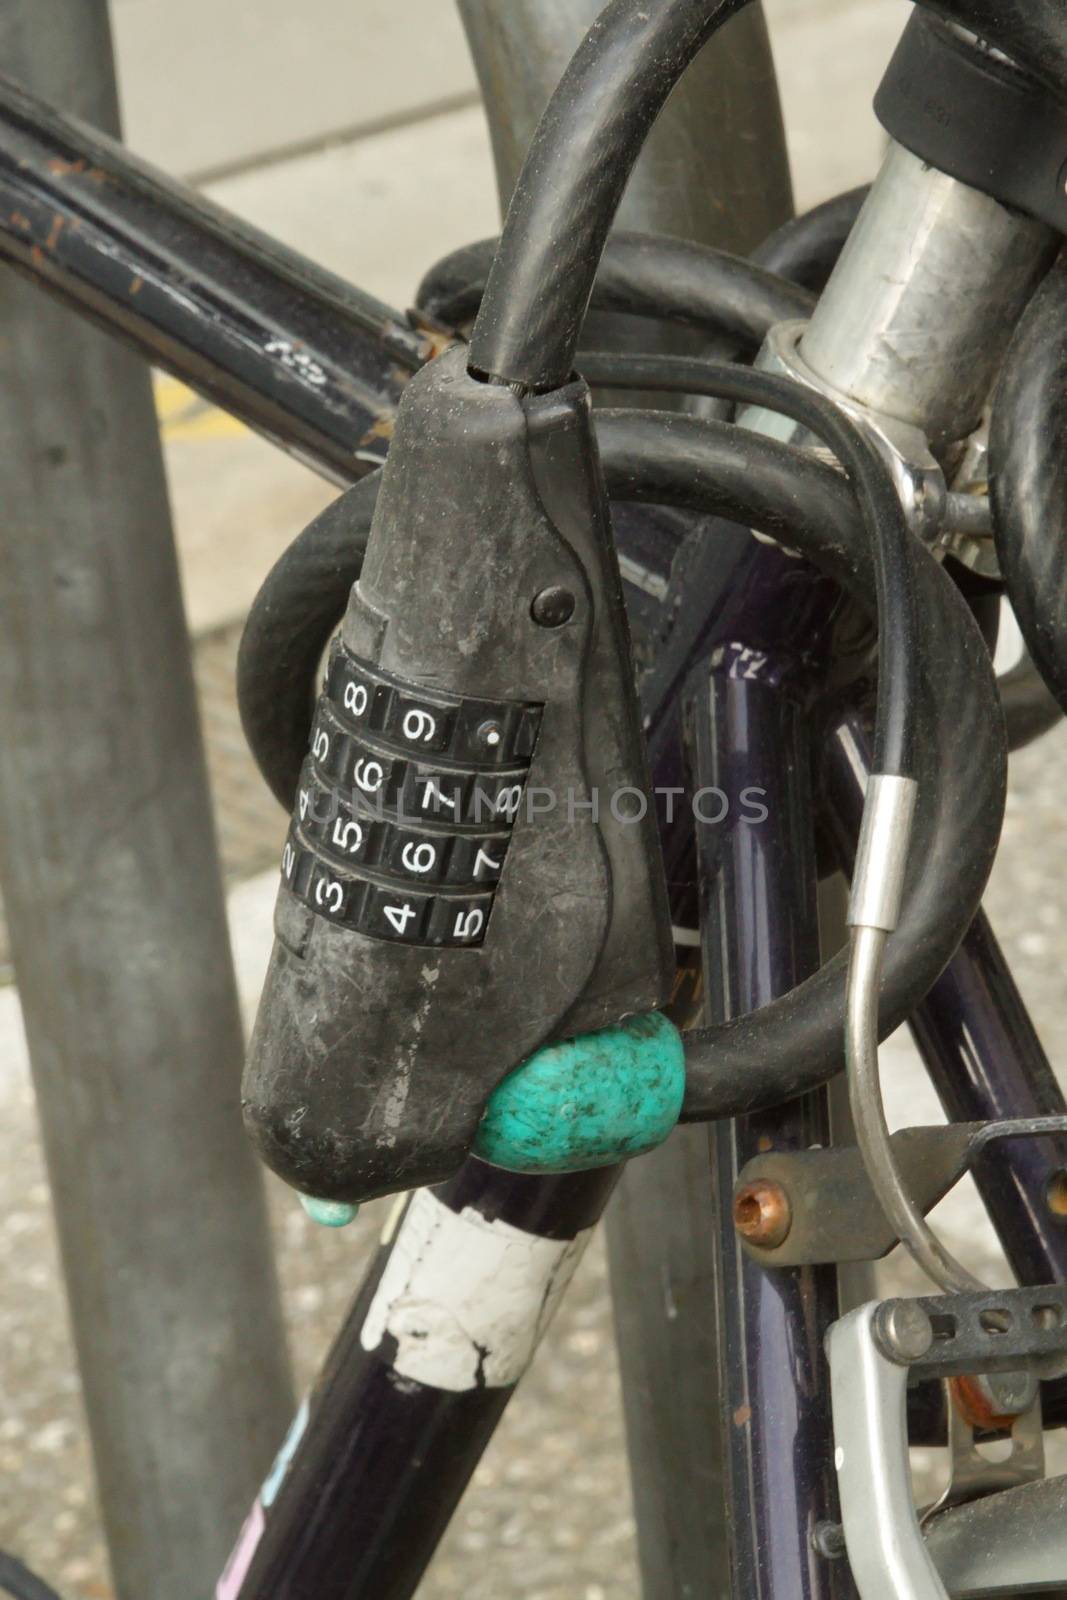 Close up on an old closed city bike padlock with numbers